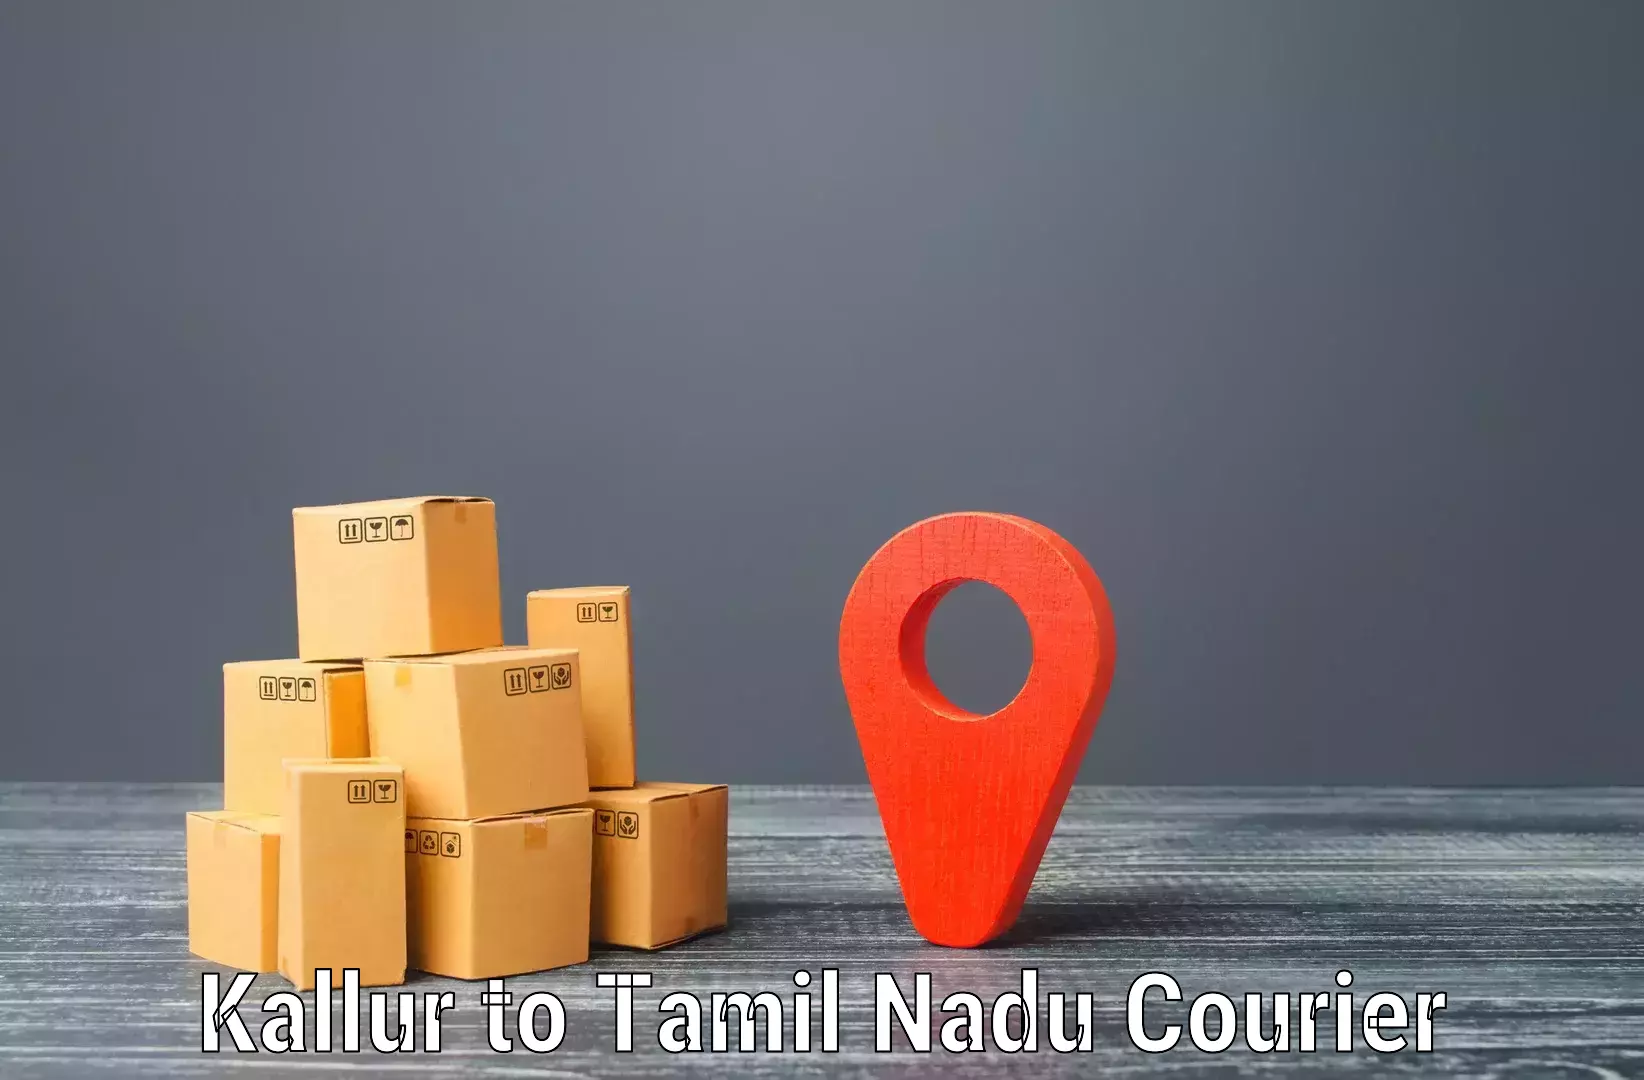 Next-day delivery options in Kallur to Perunali